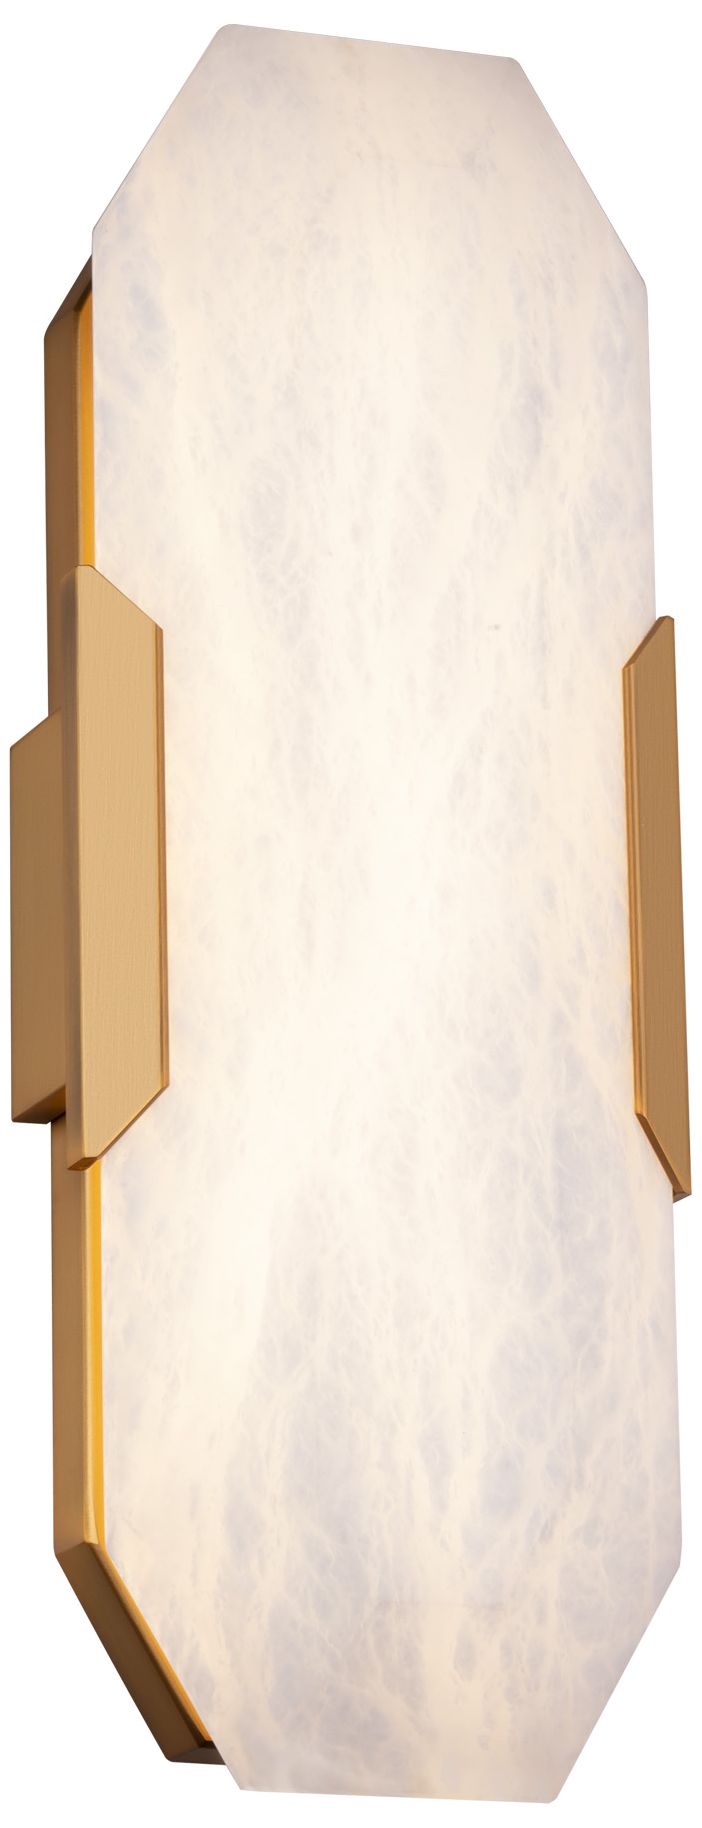 Toulouse 18"H x 6.38"W 1-Light Wall Sconce in Aged Brass